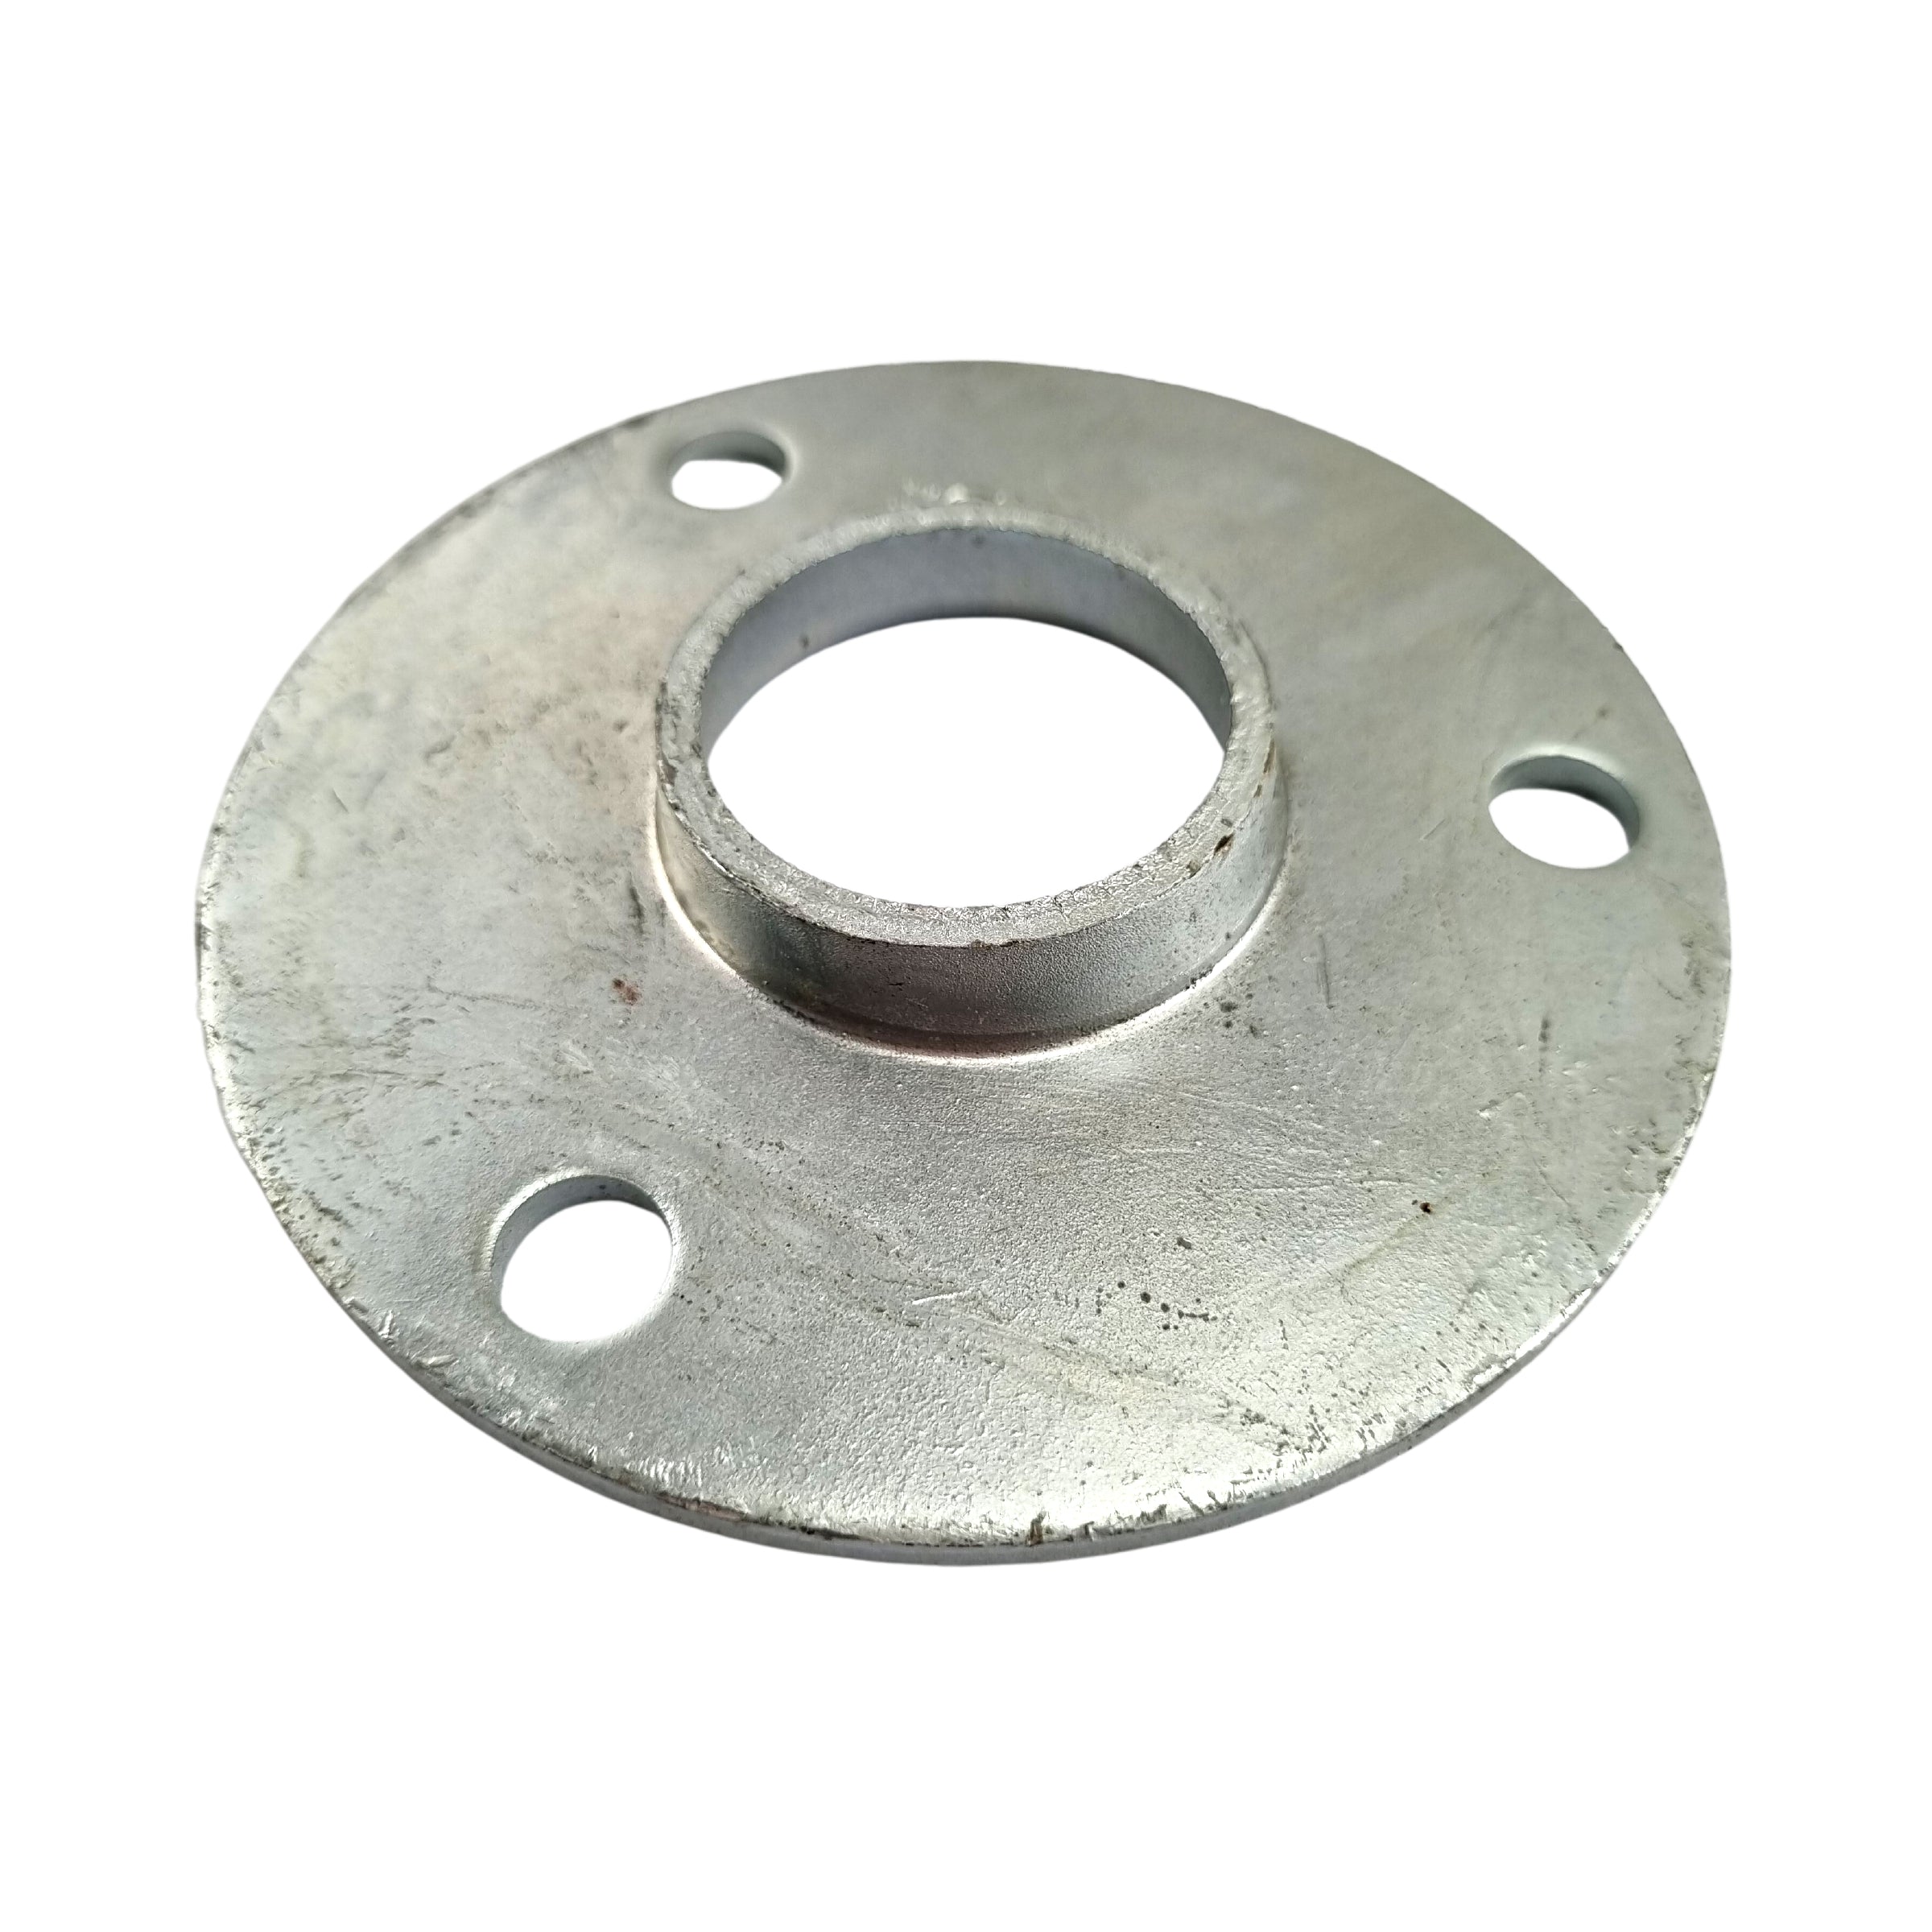 Round Flange - Galvanised. Australian made. Shop fence & gate fittings online chain.com.au. Australia wide shipping.